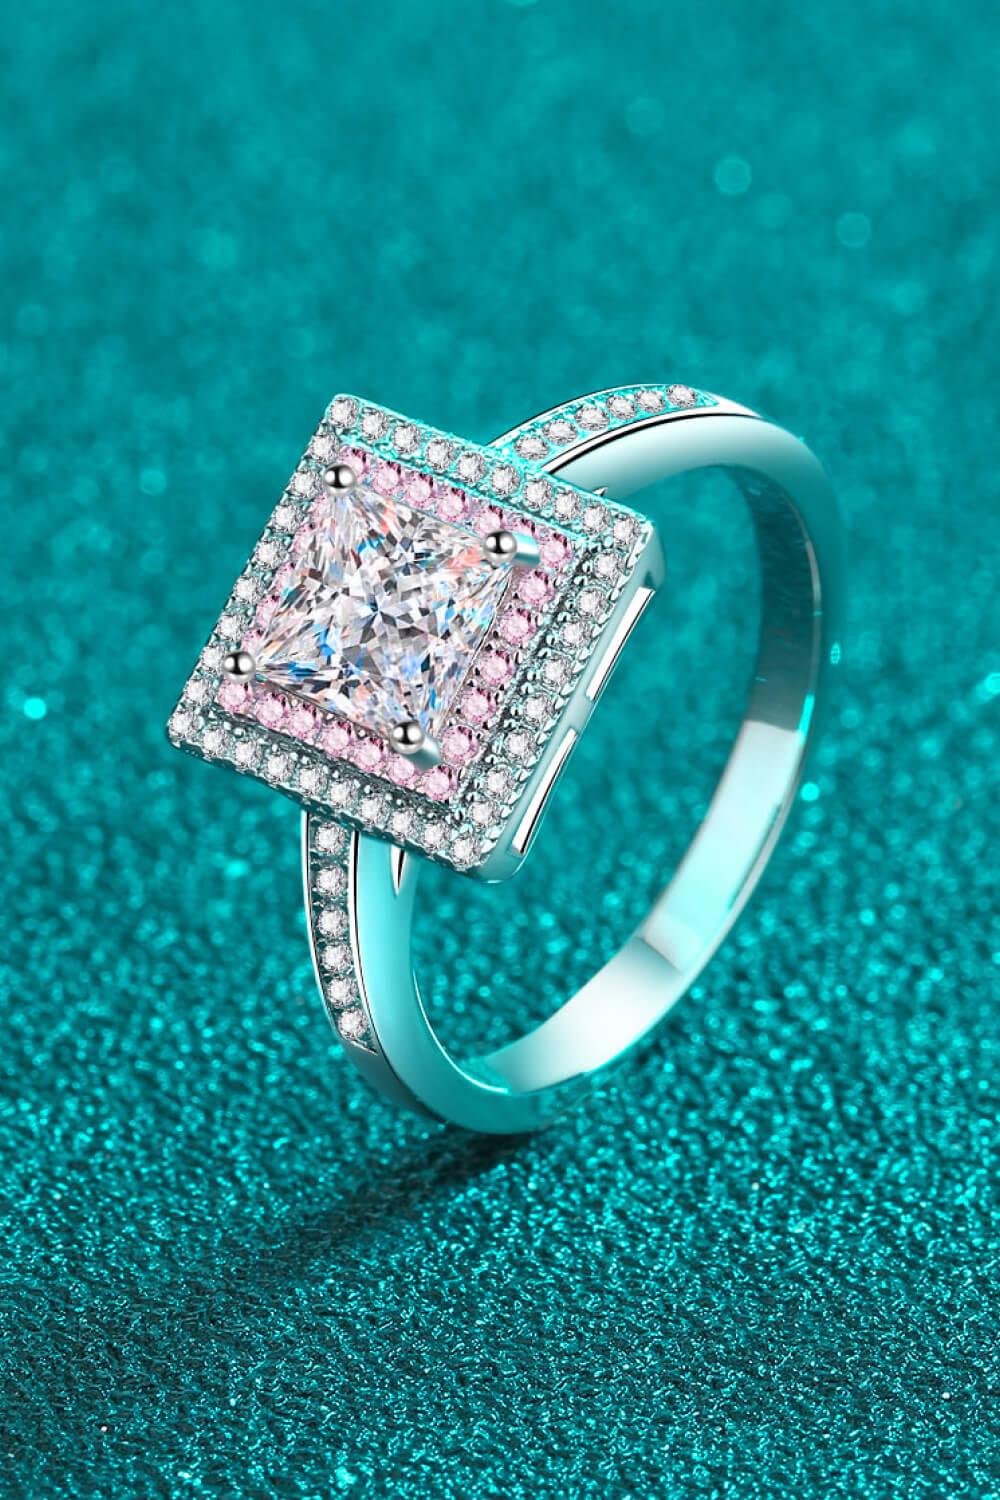 Stay Elegant 1 Carat Square Moissanite Ring - Crazy Like a Daisy Boutique